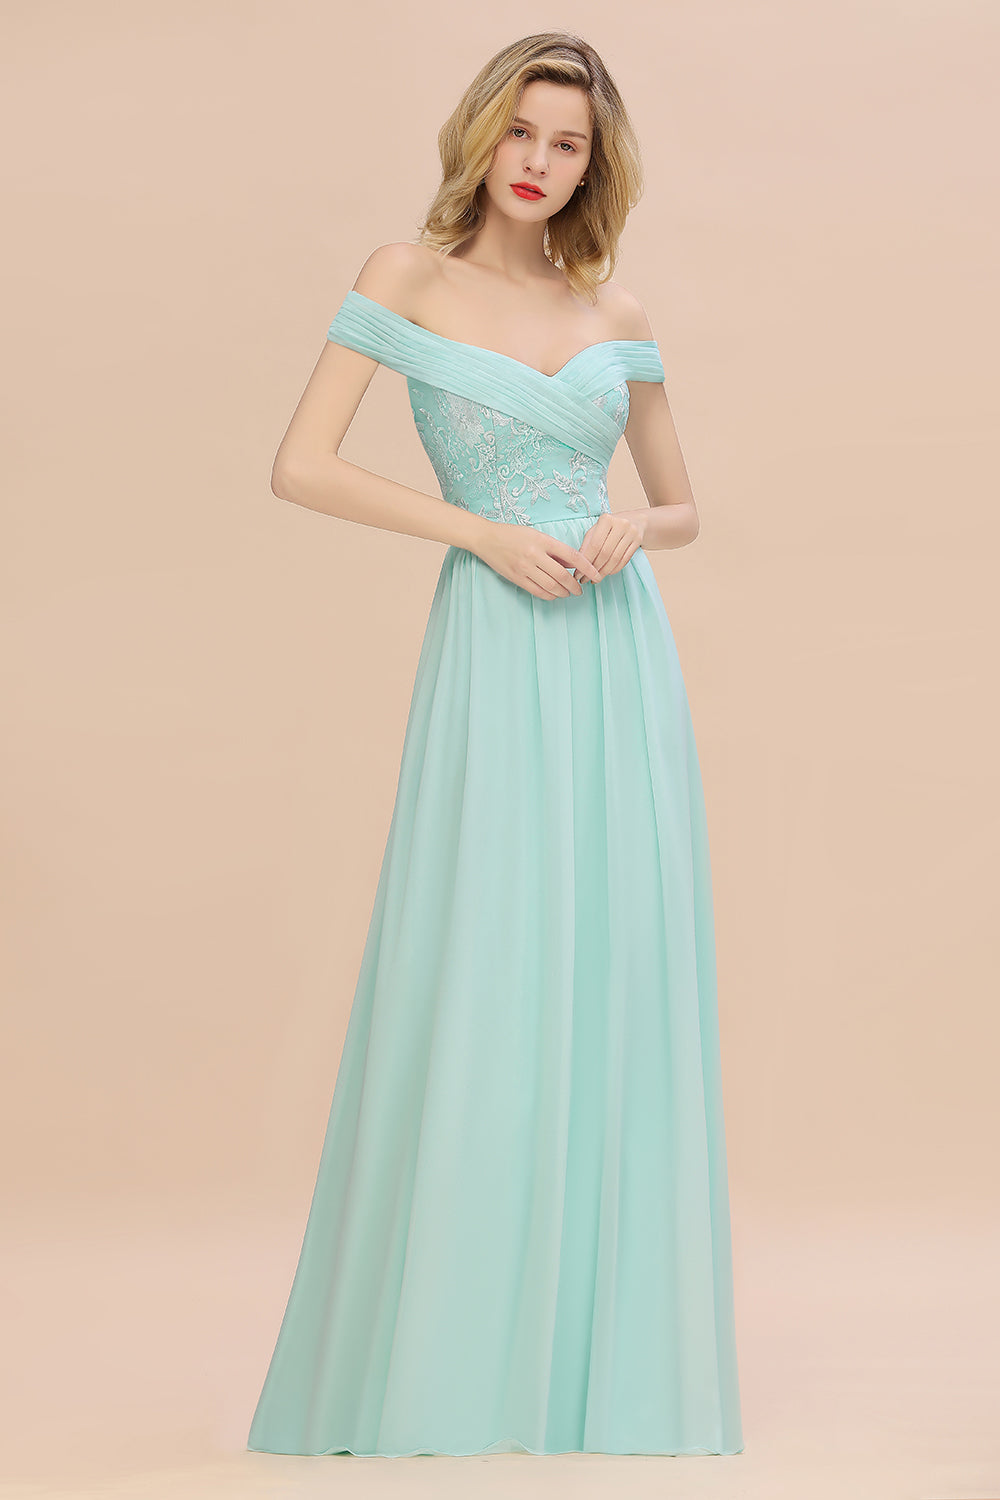 Simple Long A-line Ruffles Off-the-shoulder Bridesmaid Dress with Appliques Lace-BIZTUNNEL